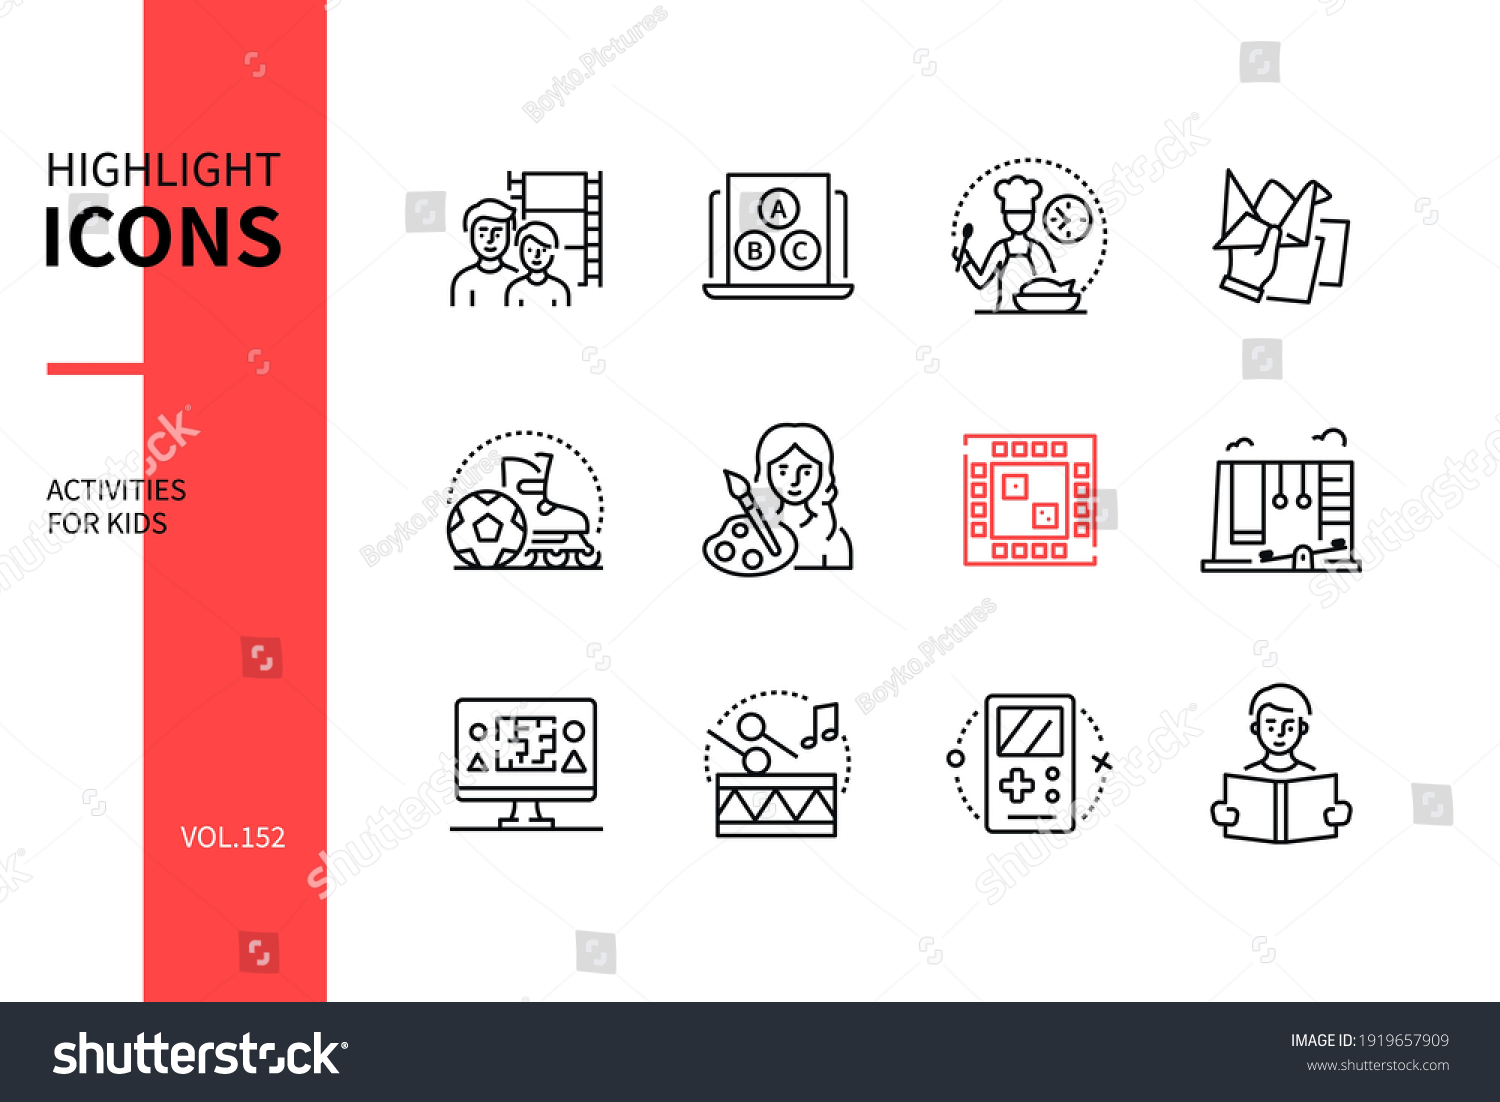 SVG of Activities for kids - line design style icons set. Parents spending time with children idea. Cinema, cooking, handicraft, sport, drawing, board, video and outdoor games, learn and play, music, reading svg